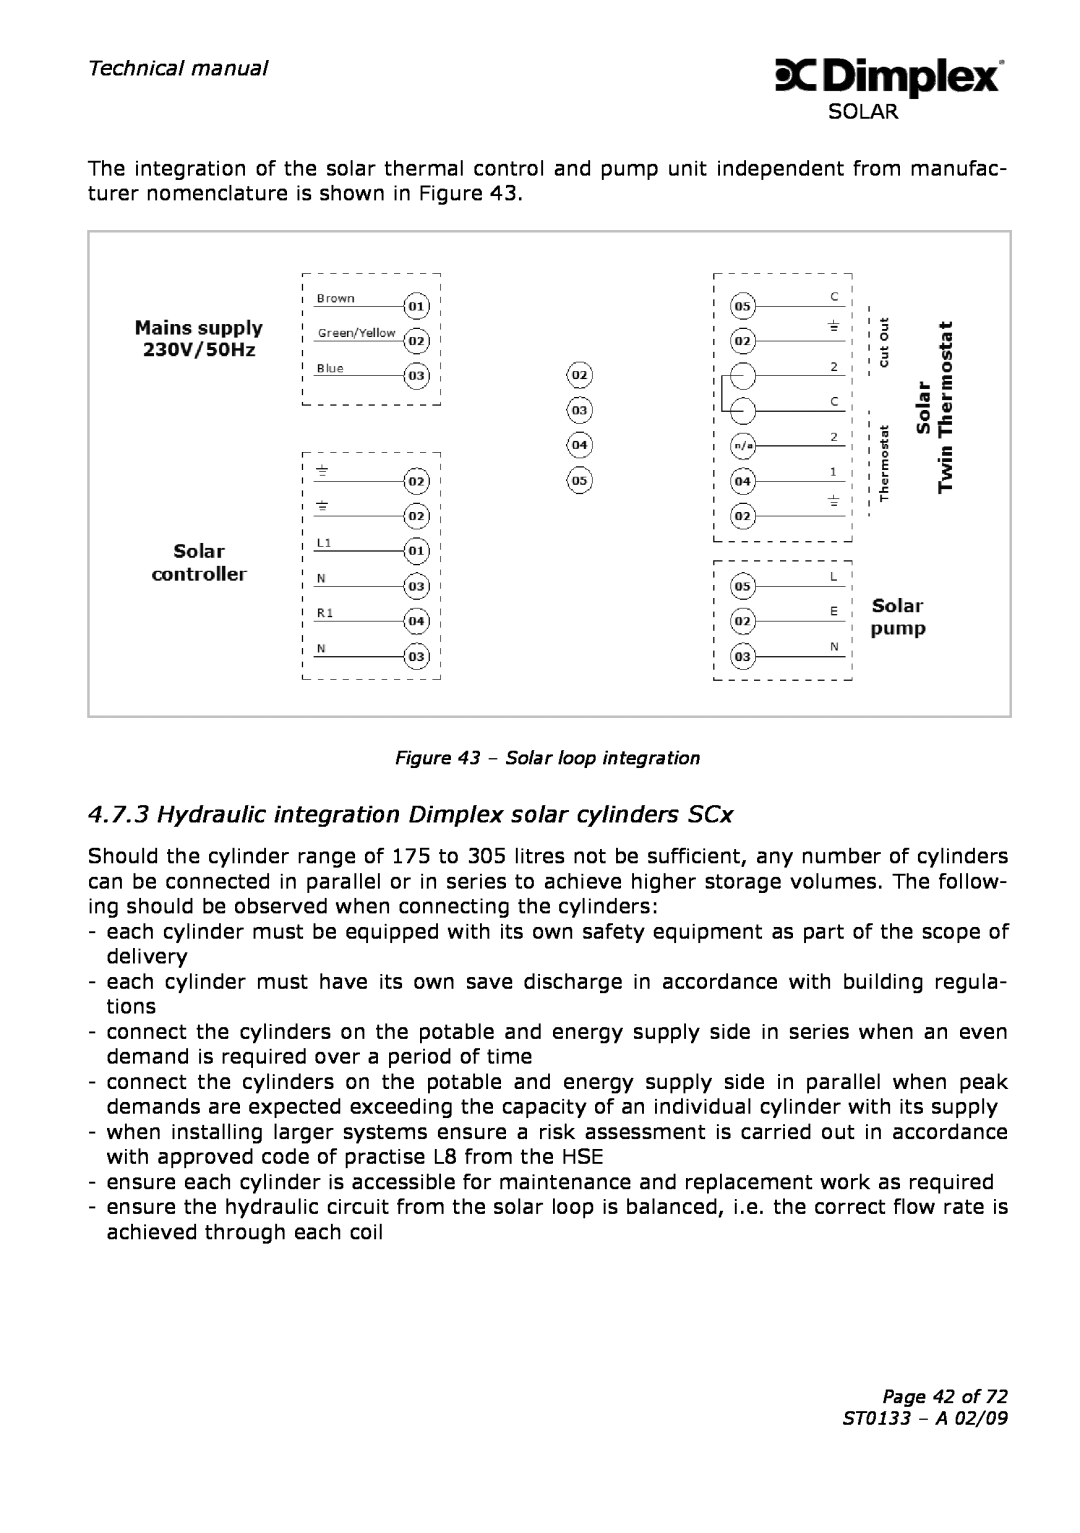 Dimplex Hydraulic integration Dimplex solar cylinders SCx, Solar loop integration, Page 42 of ST0133 - A 02/09 